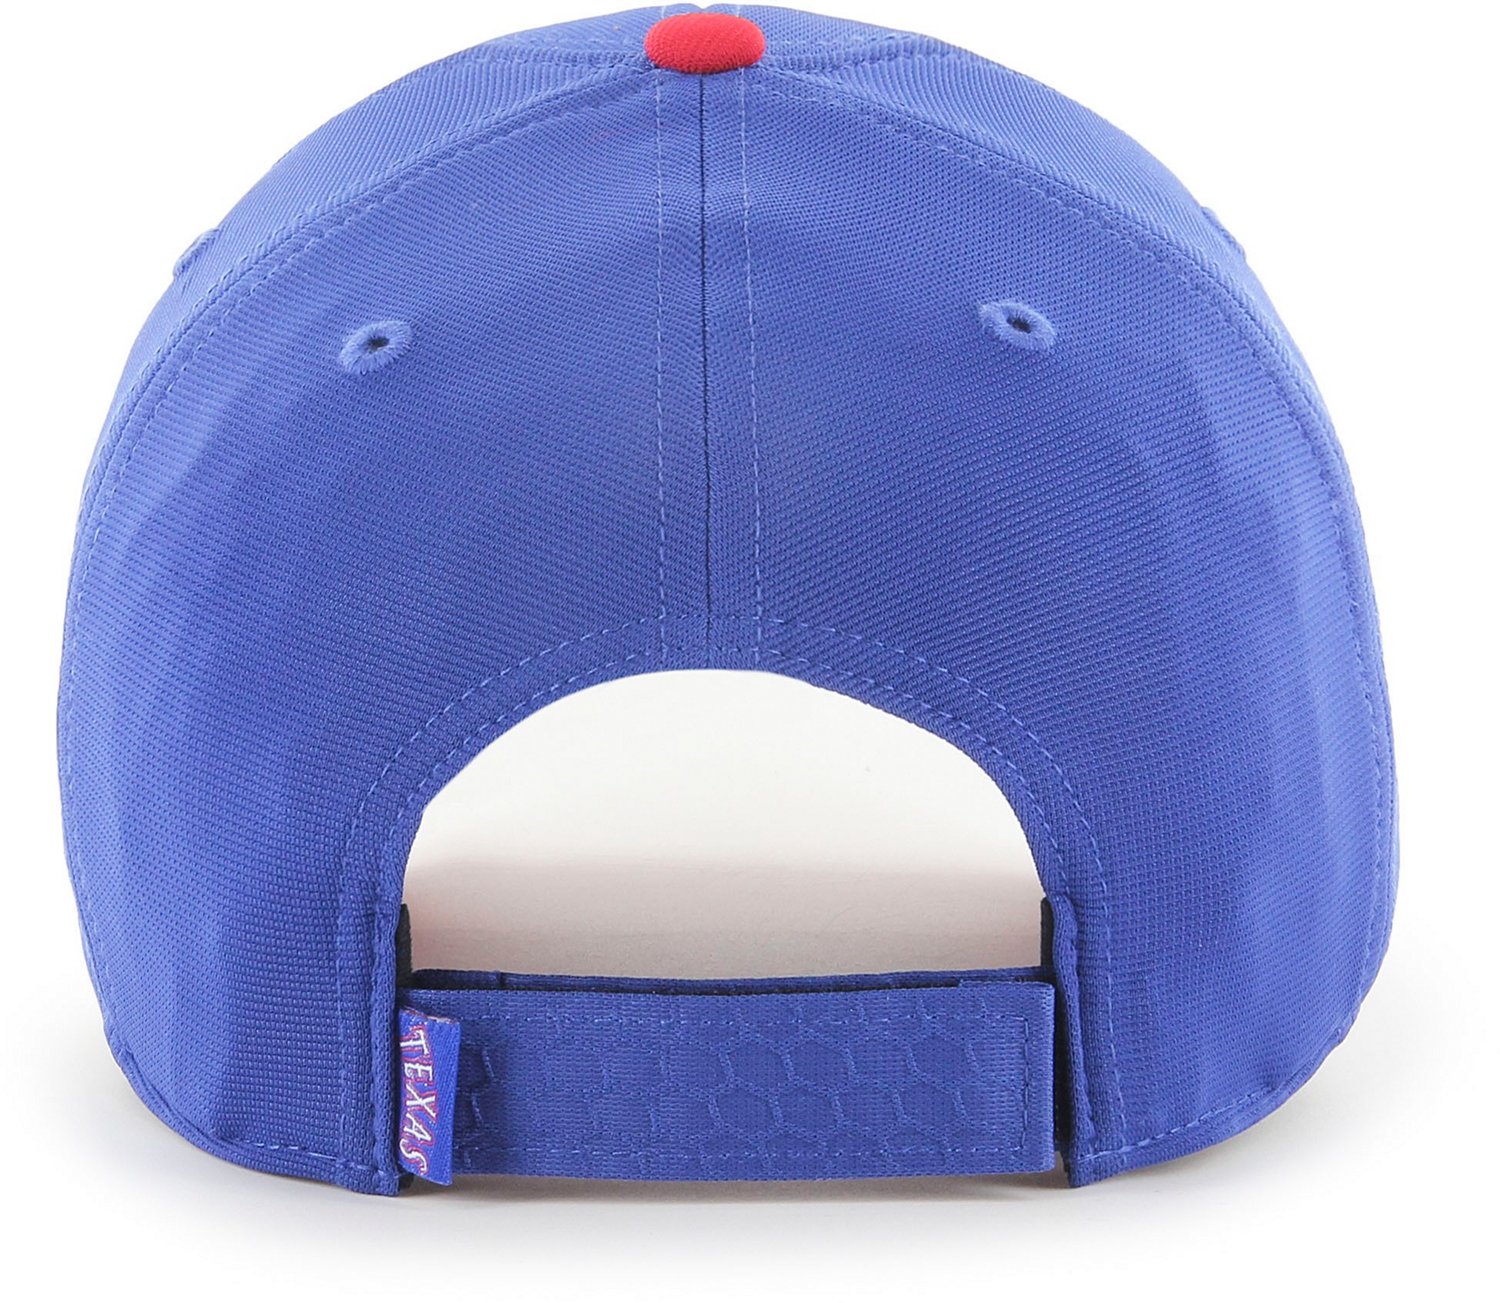 Red Peagle Hat At Academy : r/TexasRangers